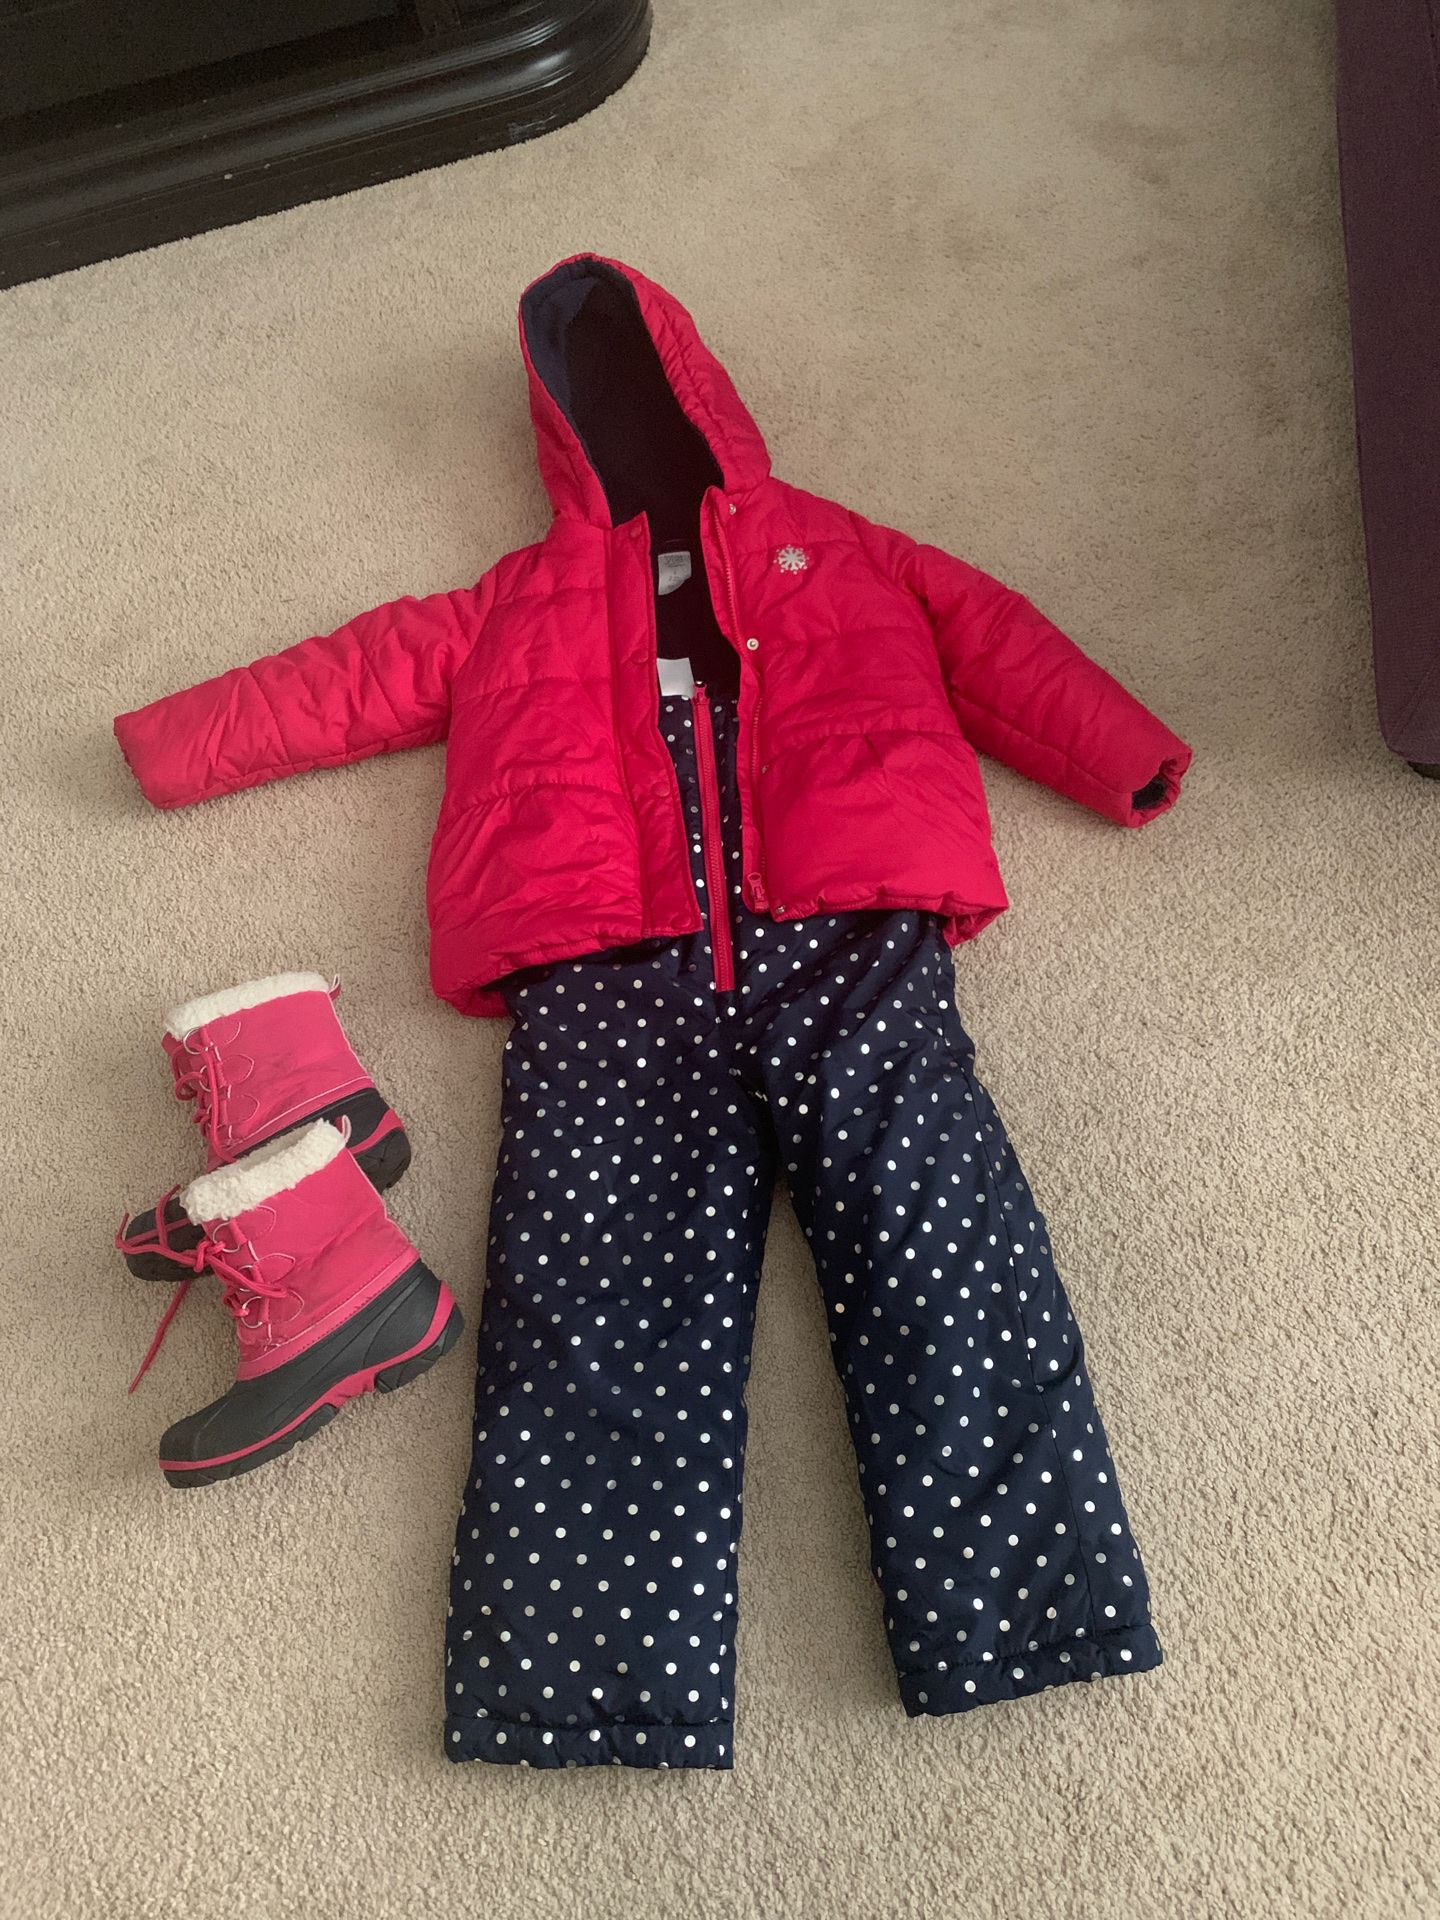 Girls snowsuit and boots- size 6